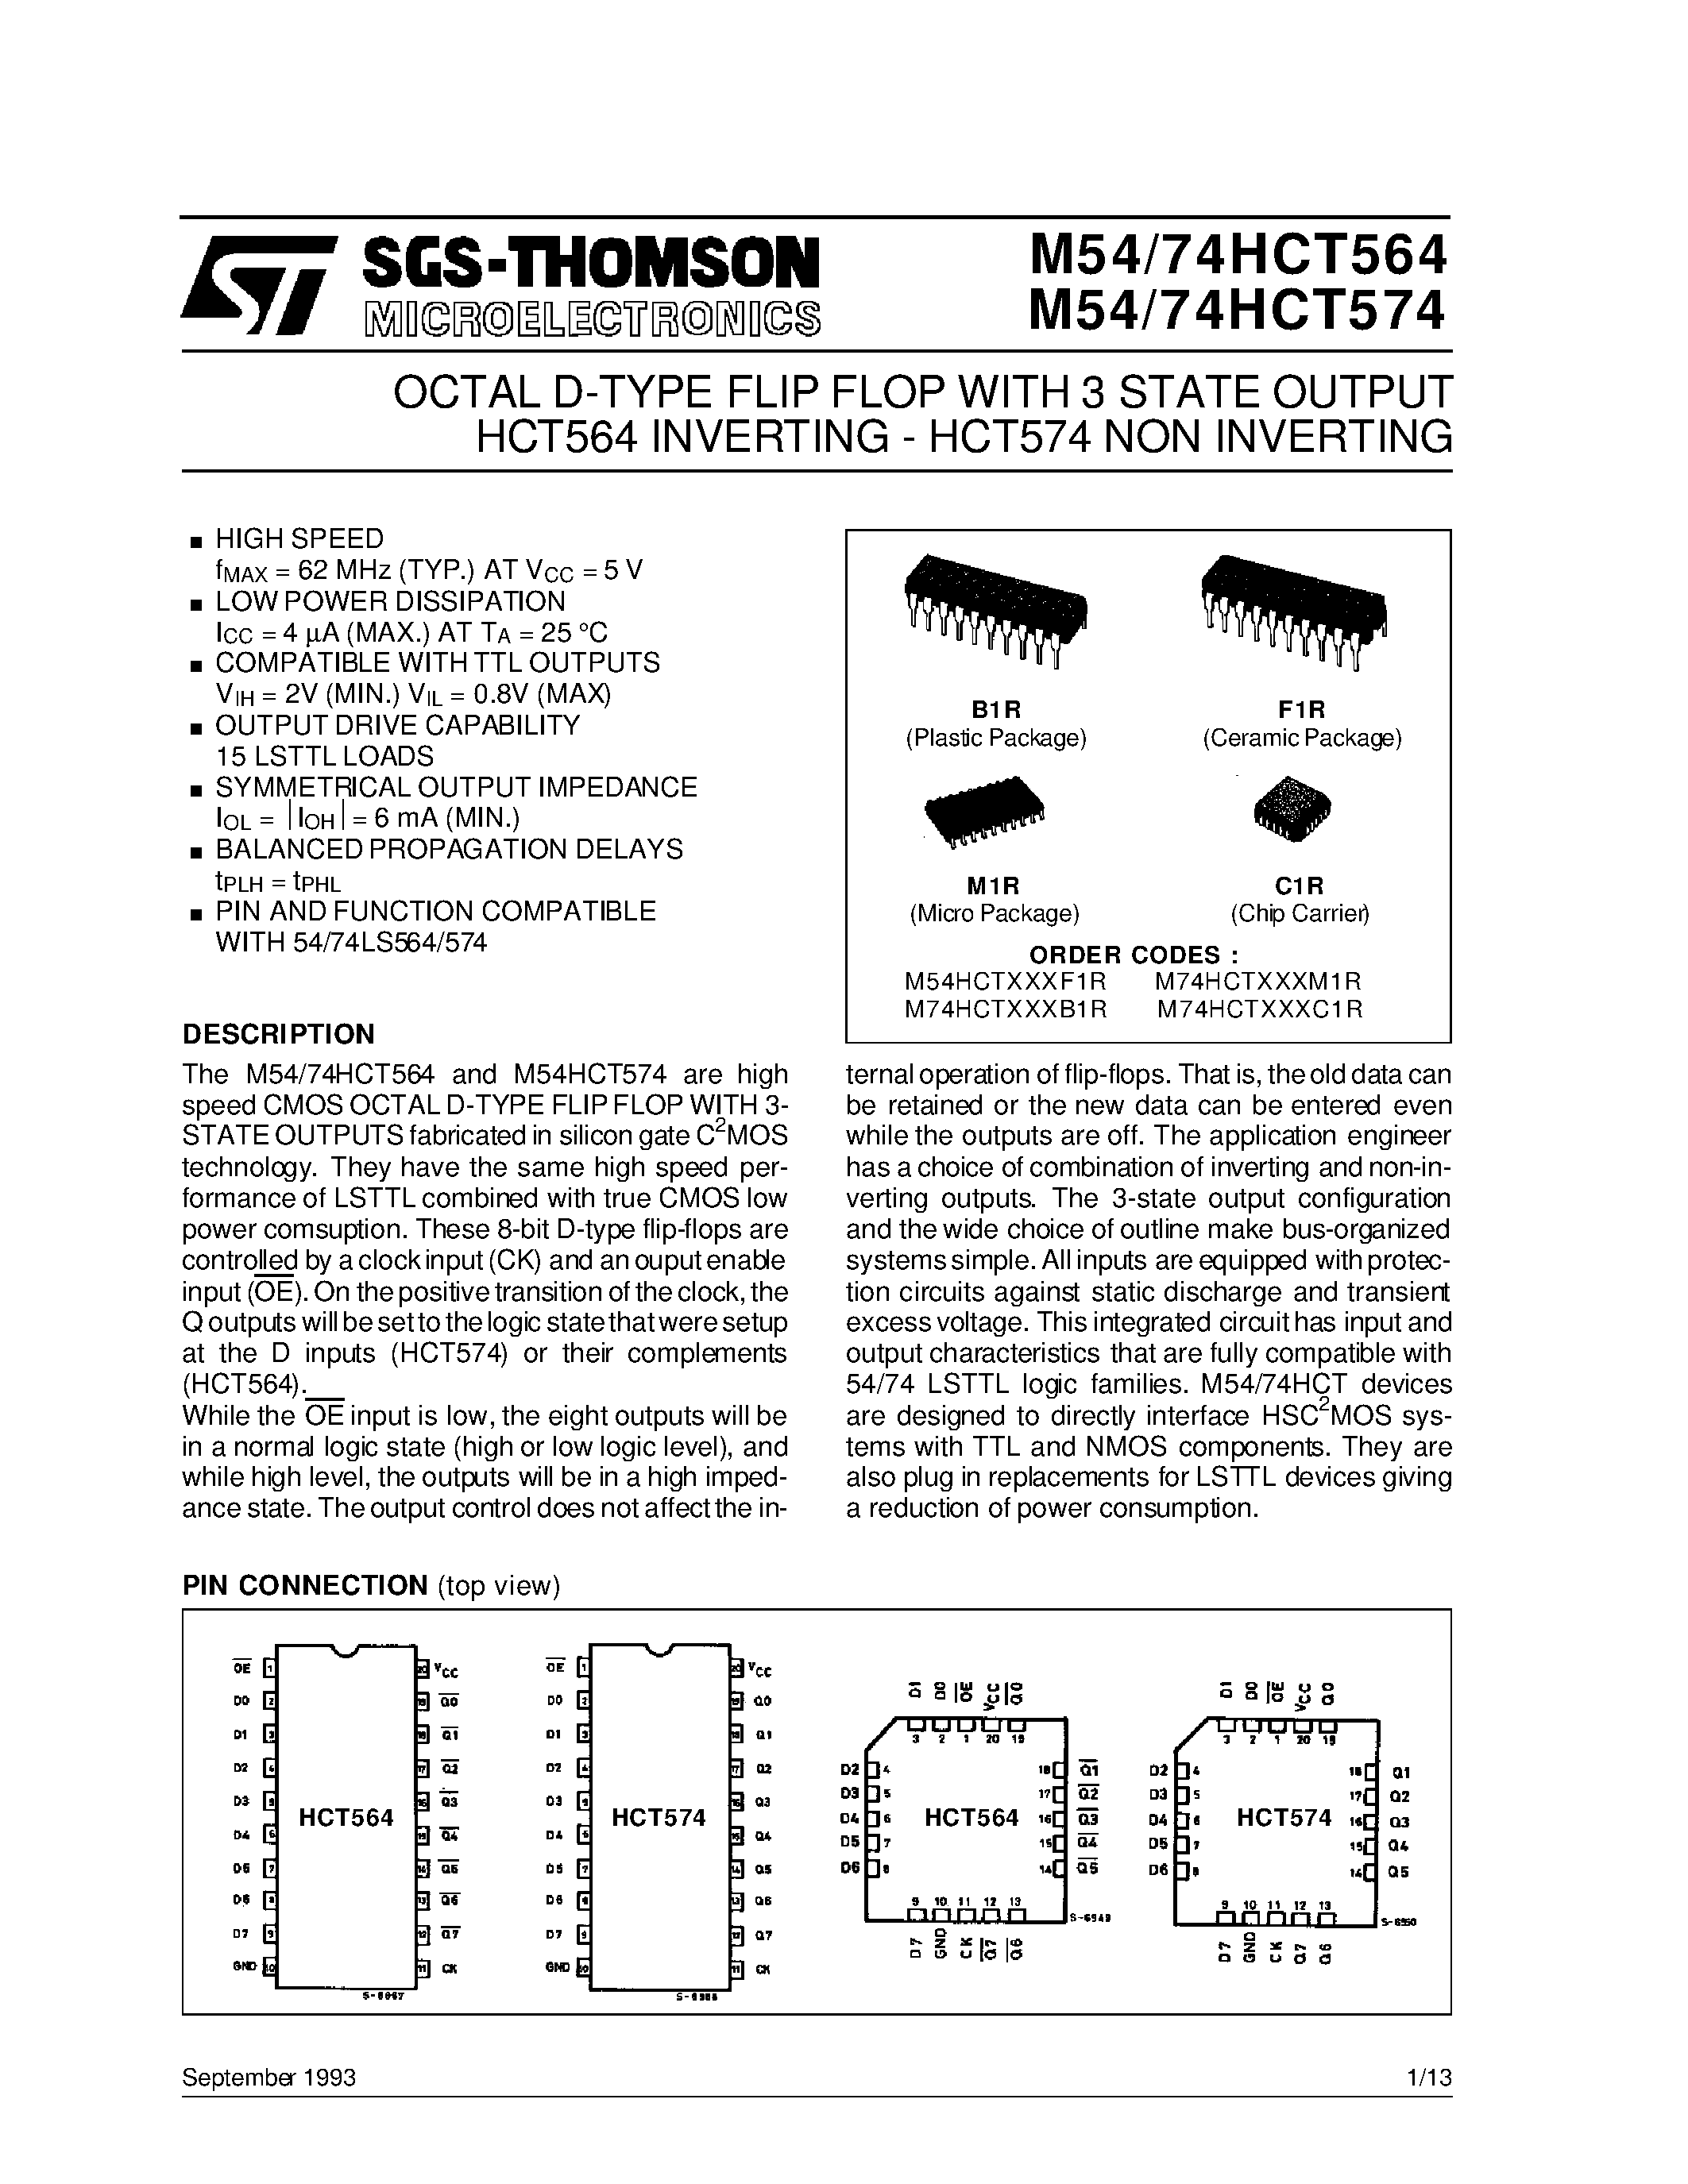 Datasheet M74HCT574 - OCTAL D-TYPE FLIP FLOP WITH 3 STATE OUTPUT HCT564 INVERTING - HCT574 NON INVERTING page 1